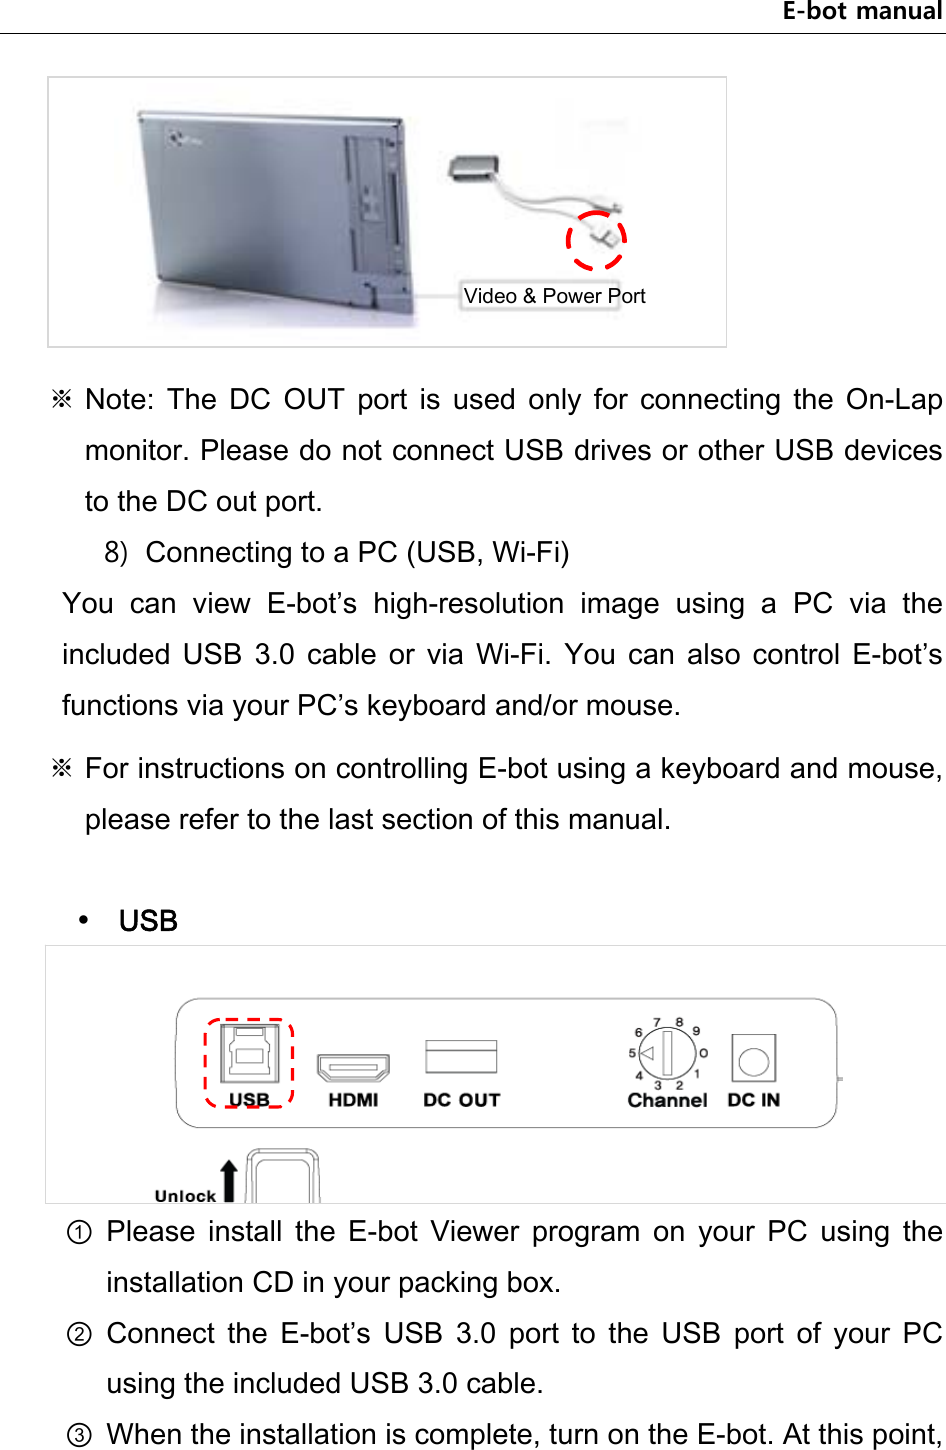 E-bot manual  ※ Note:  The  DC  OUT  port  is  used  only  for  connecting  the  On-Lap monitor. Please do not connect USB drives or other USB devices to the DC out port. 8) Connecting to a PC (USB, Wi-Fi)   You  can  view  E-bot’s  high-resolution  image  using  a  PC  via  the included  USB  3.0  cable  or  via  Wi-Fi.  You  can  also  control  E-bot’s functions via your PC’s keyboard and/or mouse.   ※ For instructions on controlling E-bot using a keyboard and mouse, please refer to the last section of this manual.   USB  ① Please  install  the  E-bot  Viewer  program  on  your  PC  using  the installation CD in your packing box. ② Connect  the  E-bot’s  USB  3.0  port  to  the  USB  port  of  your  PC using the included USB 3.0 cable. ③ When the installation is complete, turn on the E-bot. At this point, Video &amp; Power Port